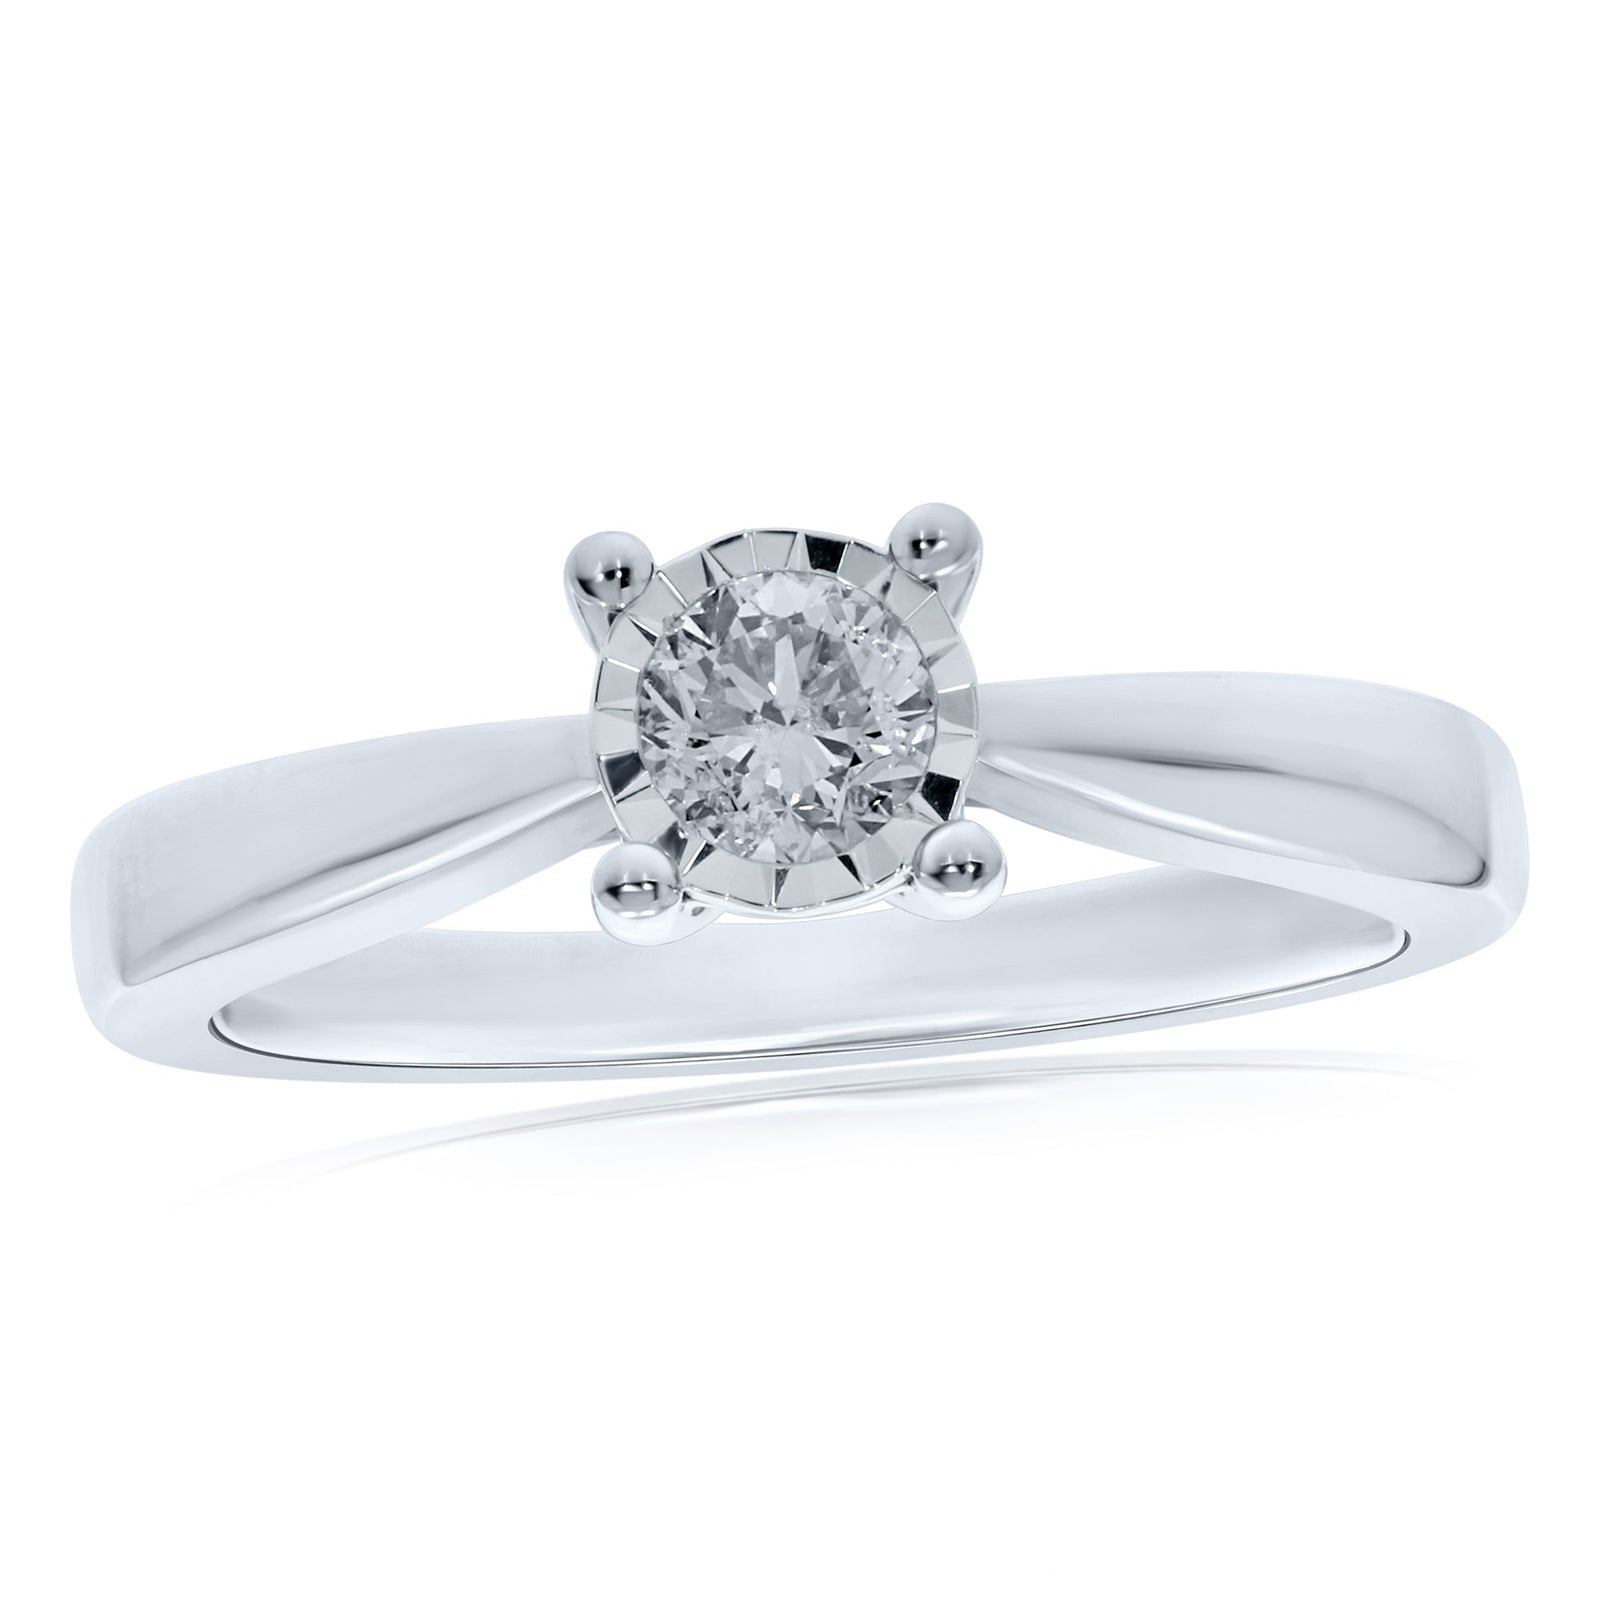 9ct white gold single stone miracle plate diamond ring 0.20ct